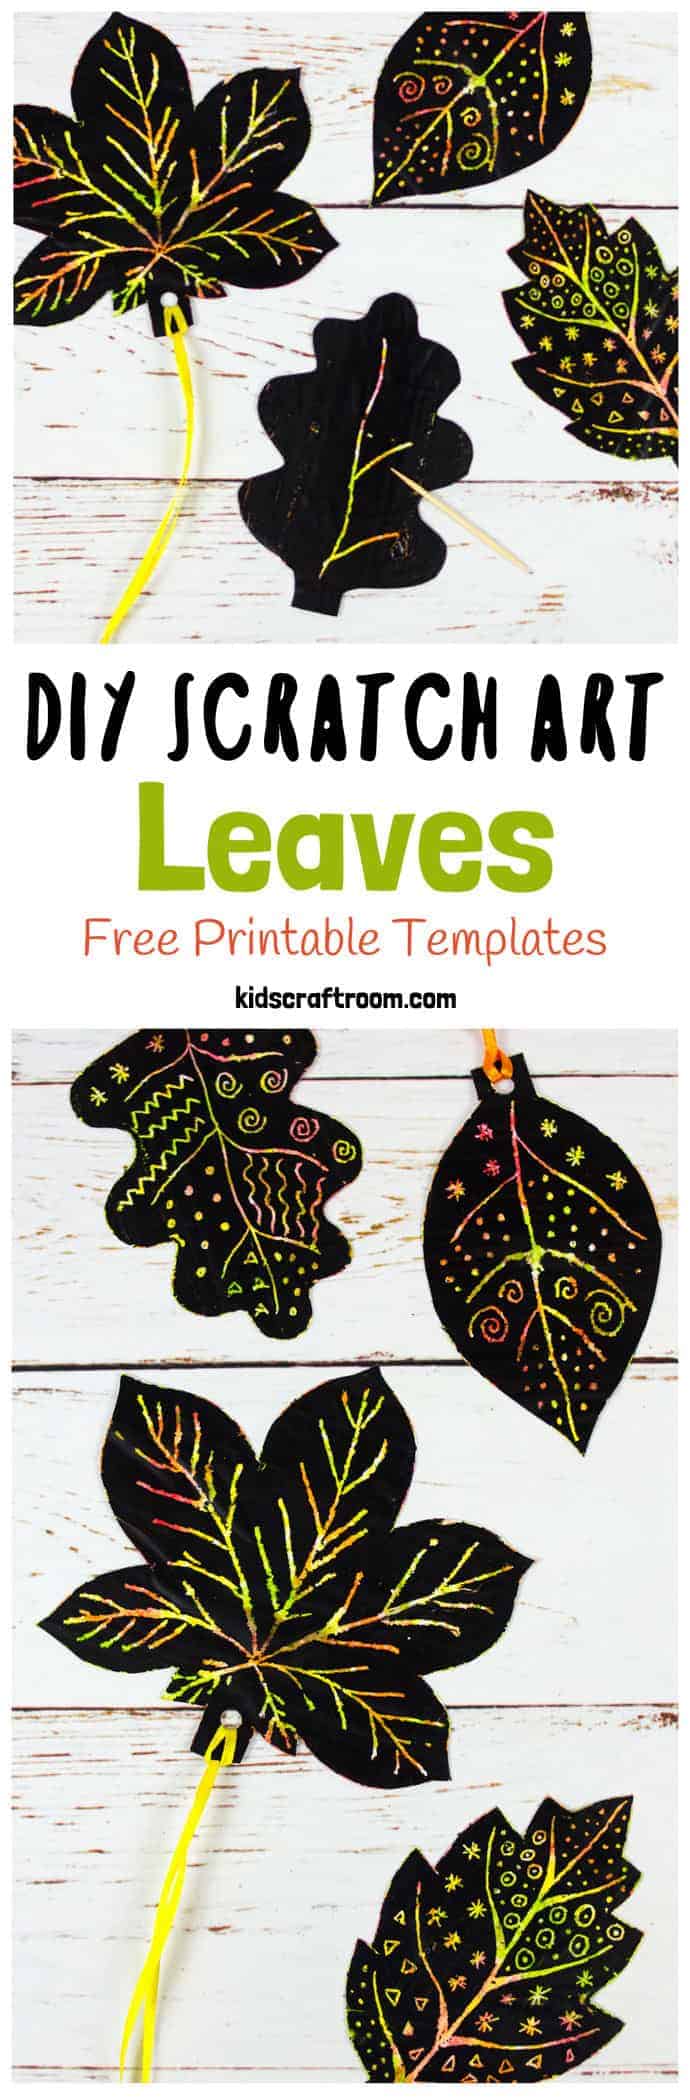 DIY SCRATCH ART LEAVES are gorgeous! This Fall craft is easy to make with our free printable templates and so colourful and vibrant! A lovely leaf art idea for Fall and Thanksgiving. #Fall #Fallcrafts #Autumn #Autumncrafts #Fallart #kidsart #artideas #leaves #leaf #scratchart #leafart #leafcrafts #kidscrafts #kidscraft #craftsforkids #kidscraftroom